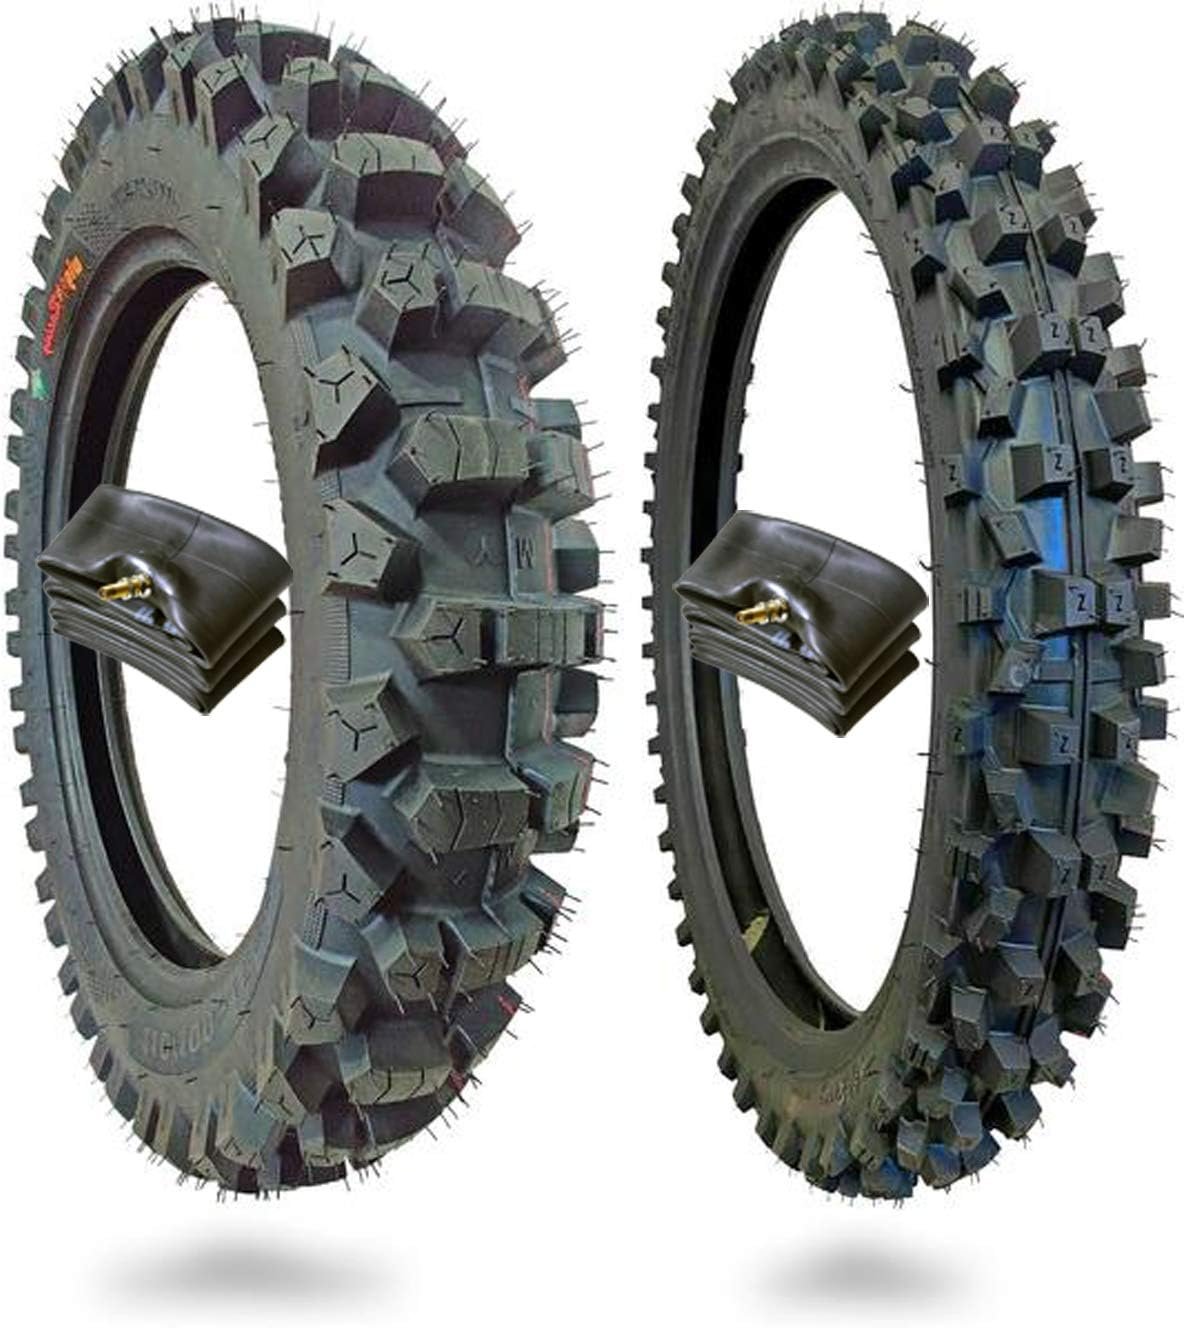 110/90-19 and 80/100-21 Motocross Dirt Bike Tires Review